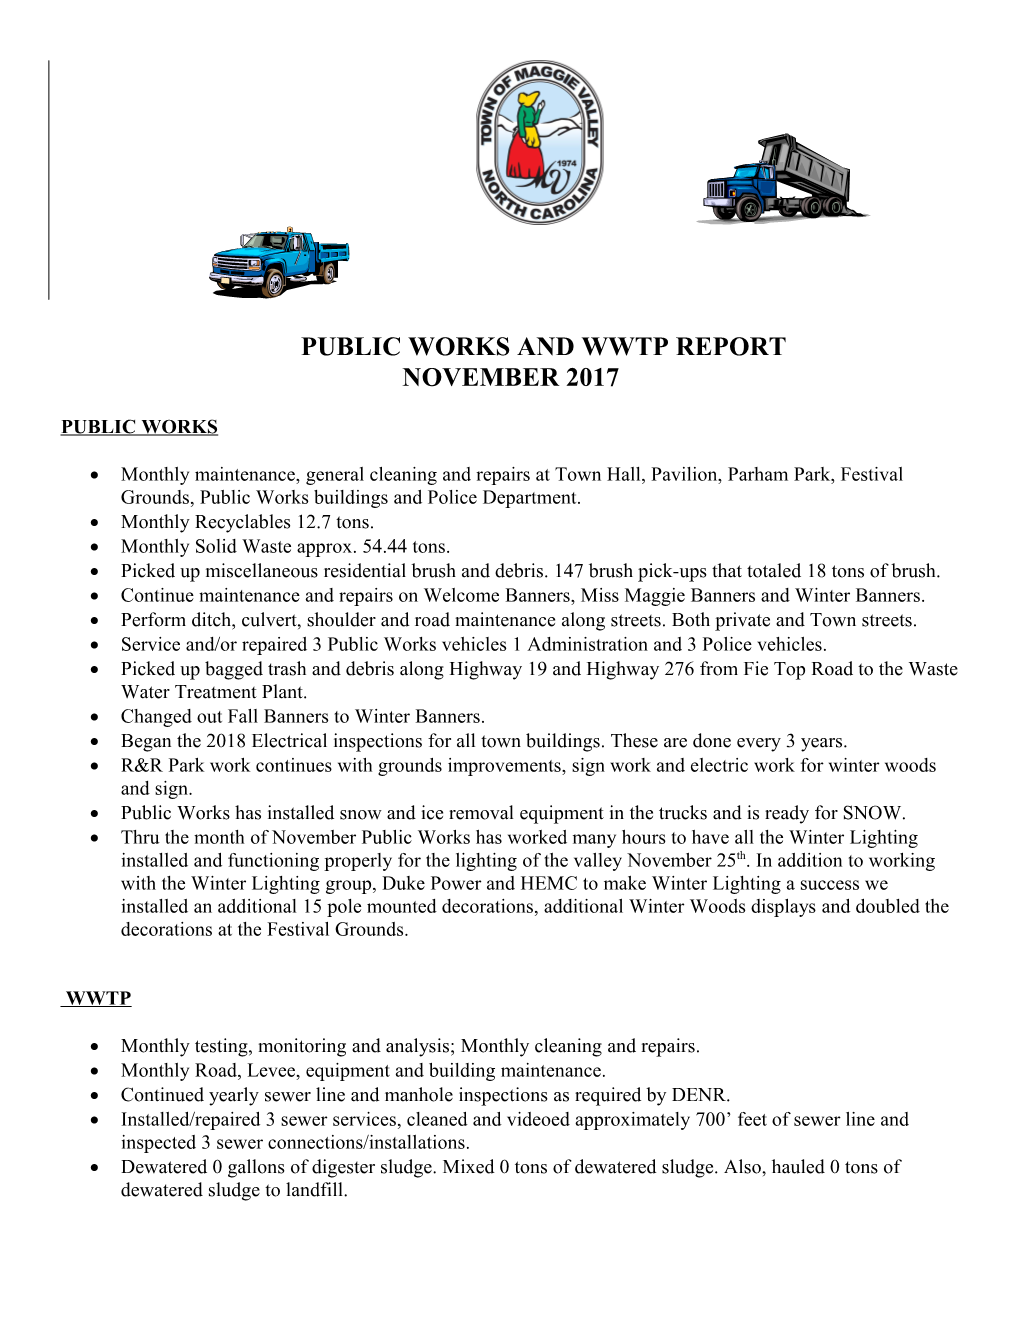 Public Works and Wwtp Report